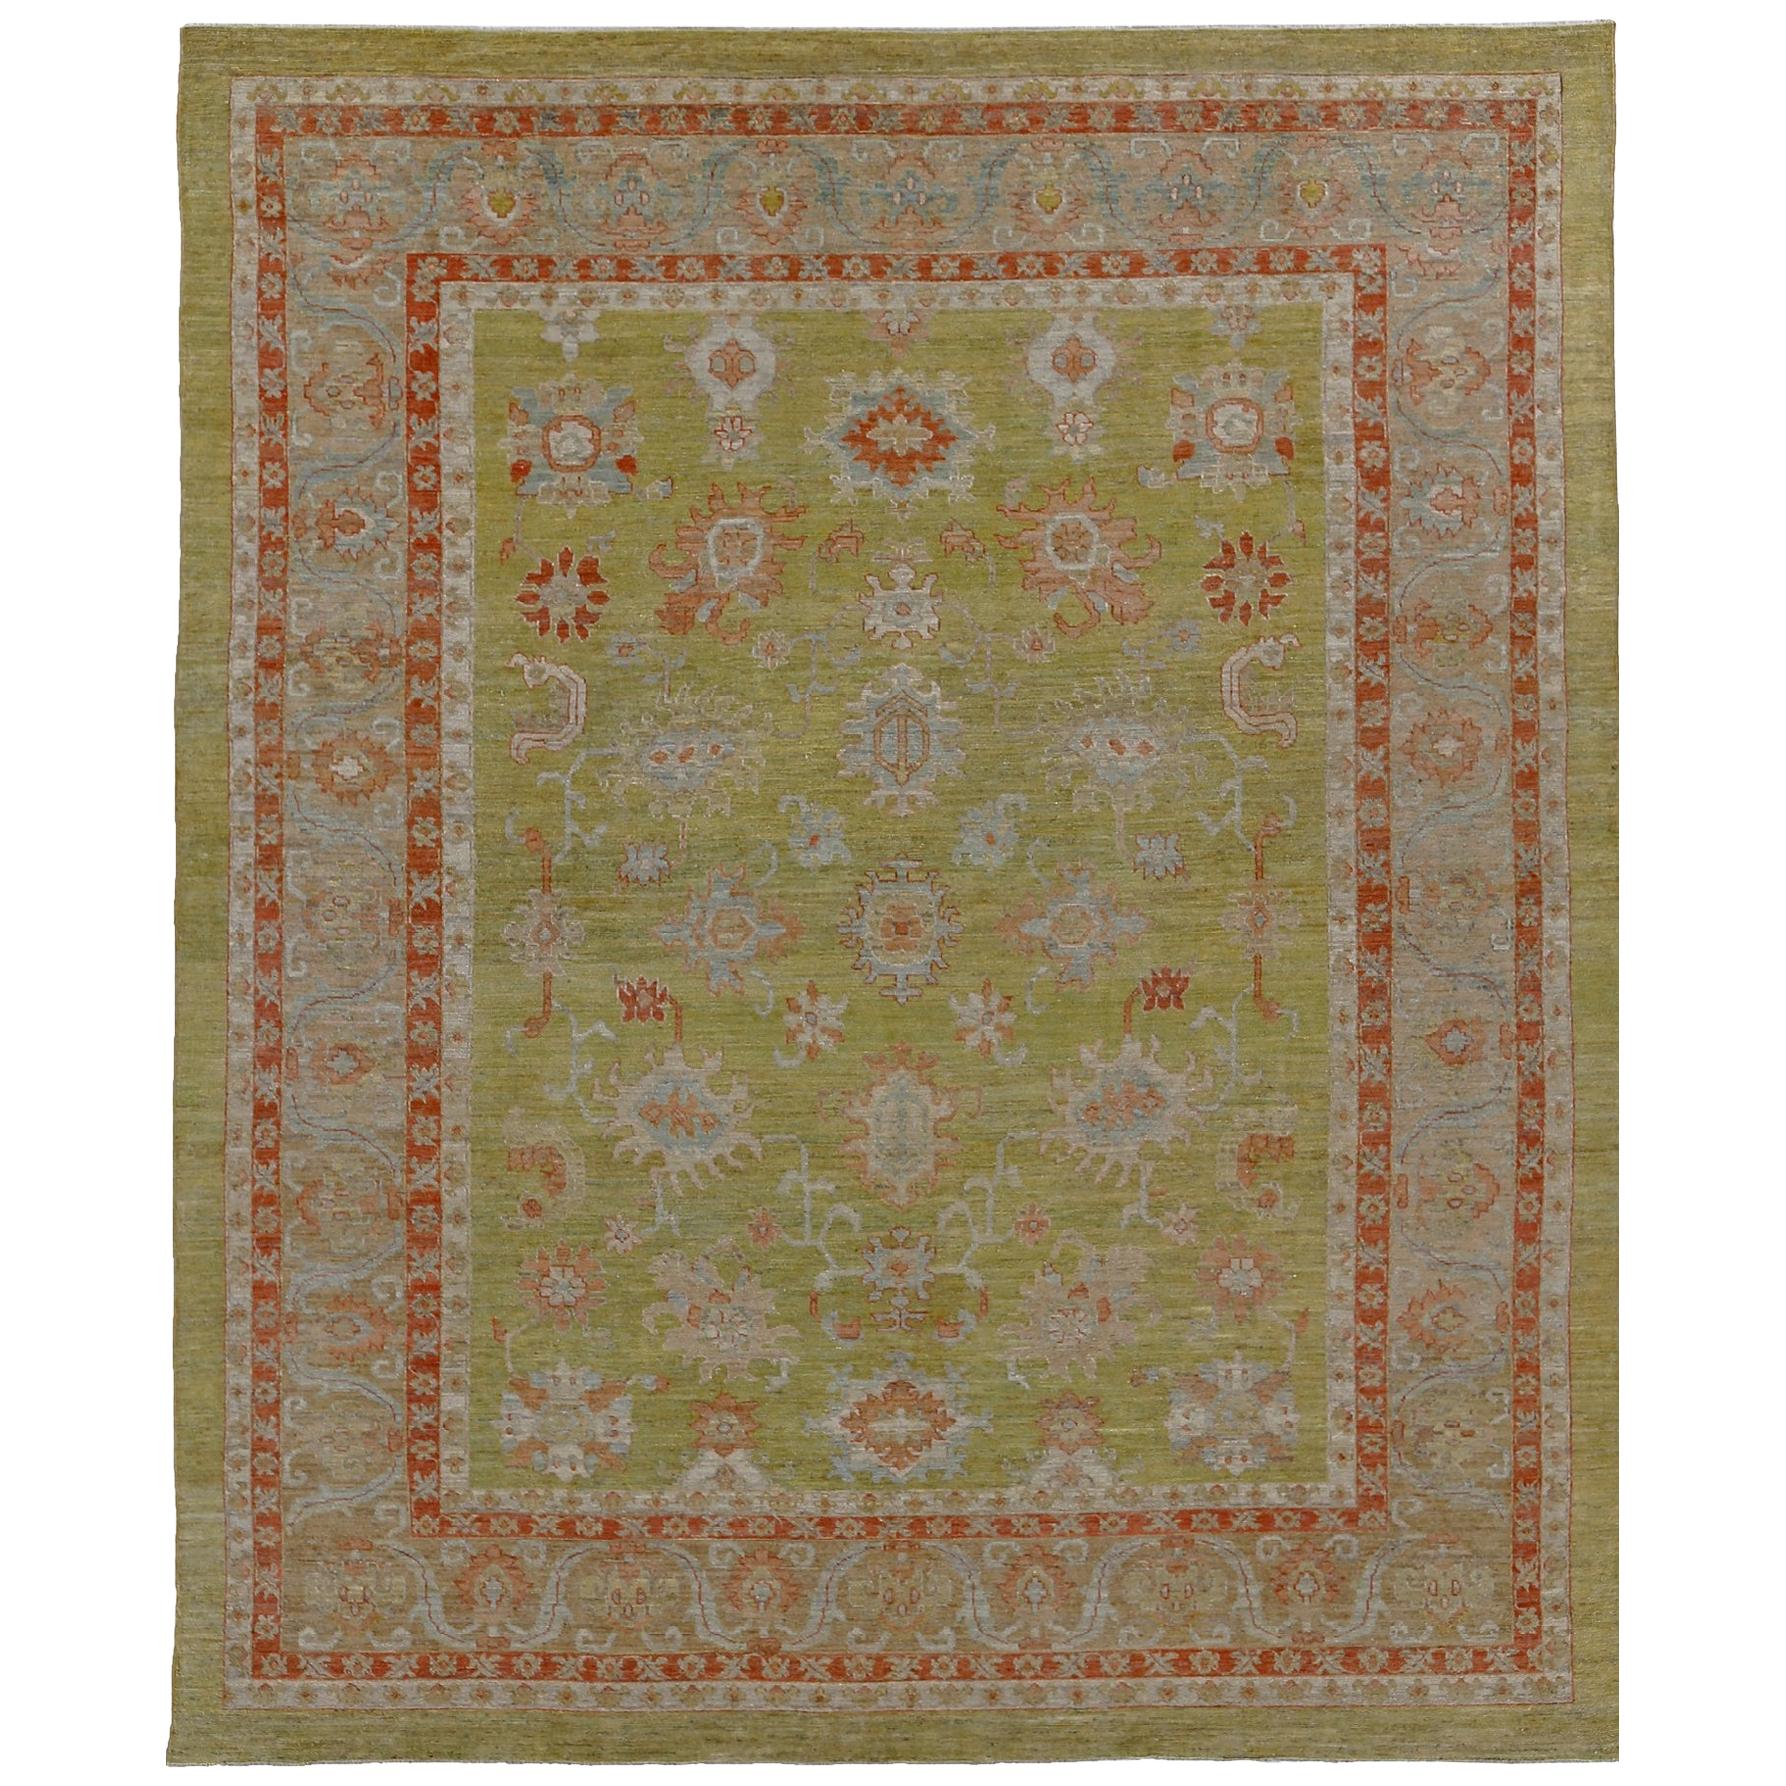 Nazmiyal Collection Green Modern Turkish Oushak Area Rug 11 ft 5 in x 14 ft